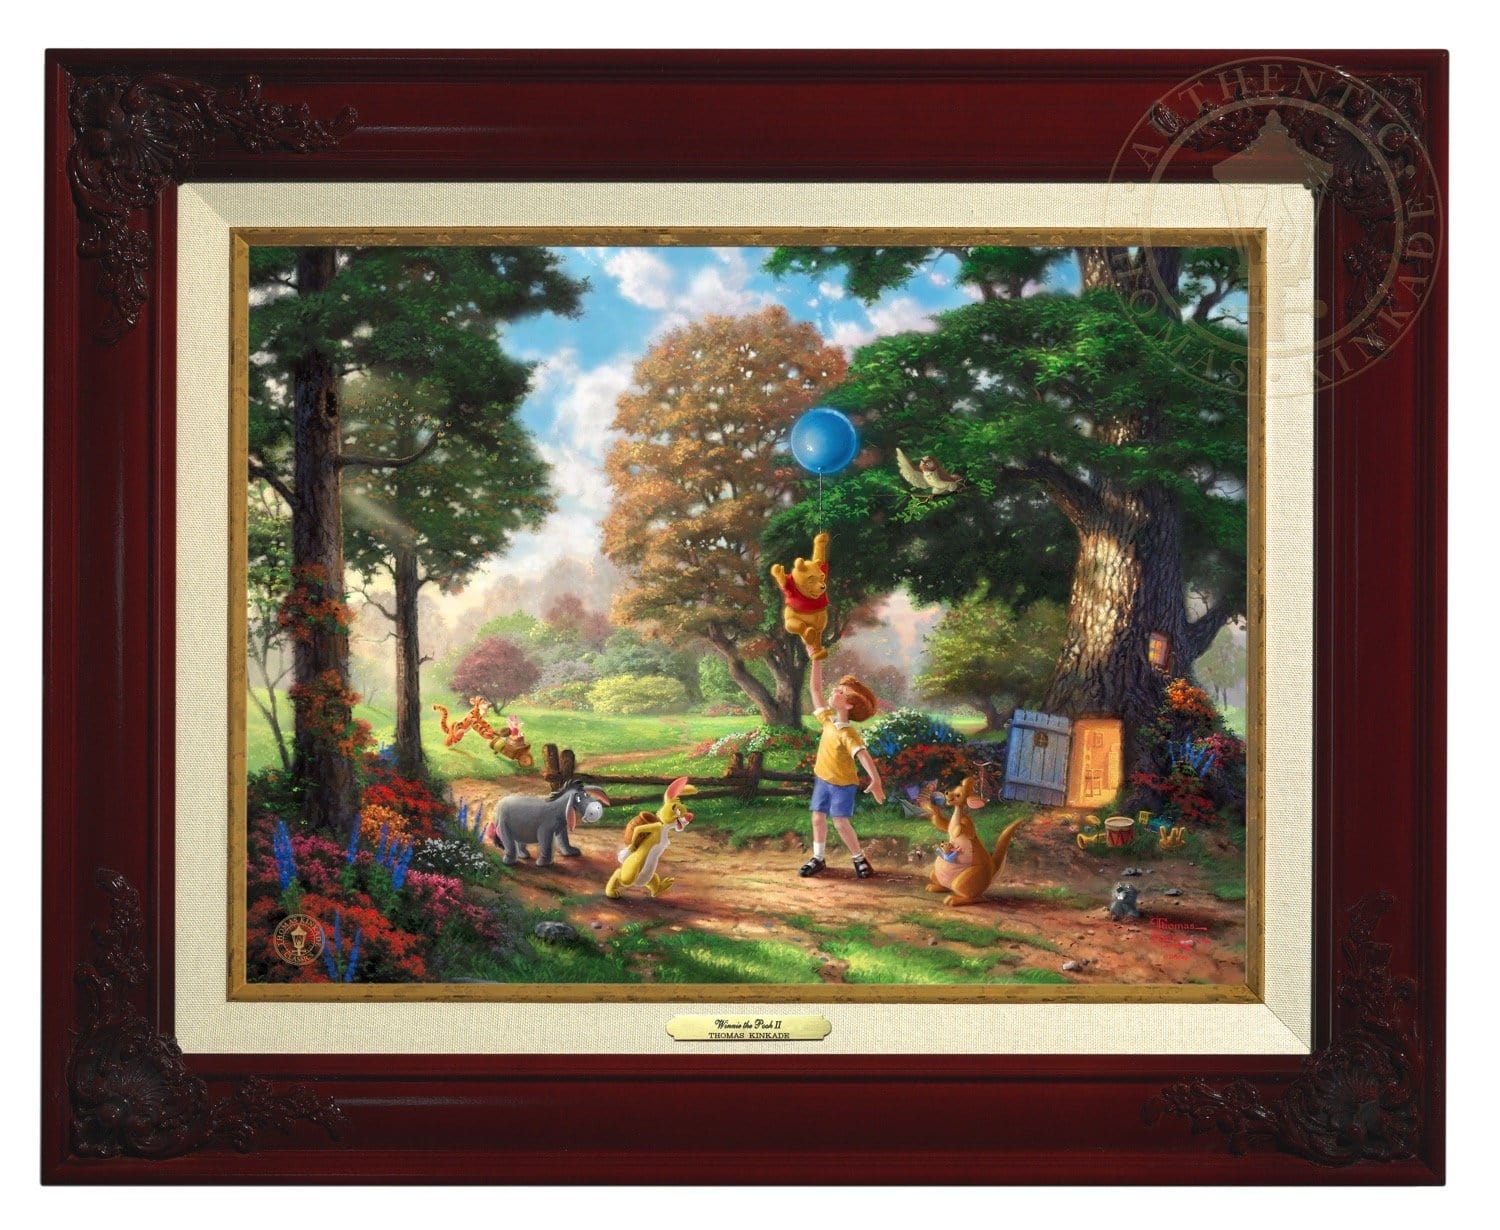 Winnie the Pooh II - Christopher Robin, Winnie the Pooh and the delightful menagerie of friends as they all adventured in the Hundred Acre Wood - Brandy Frame.